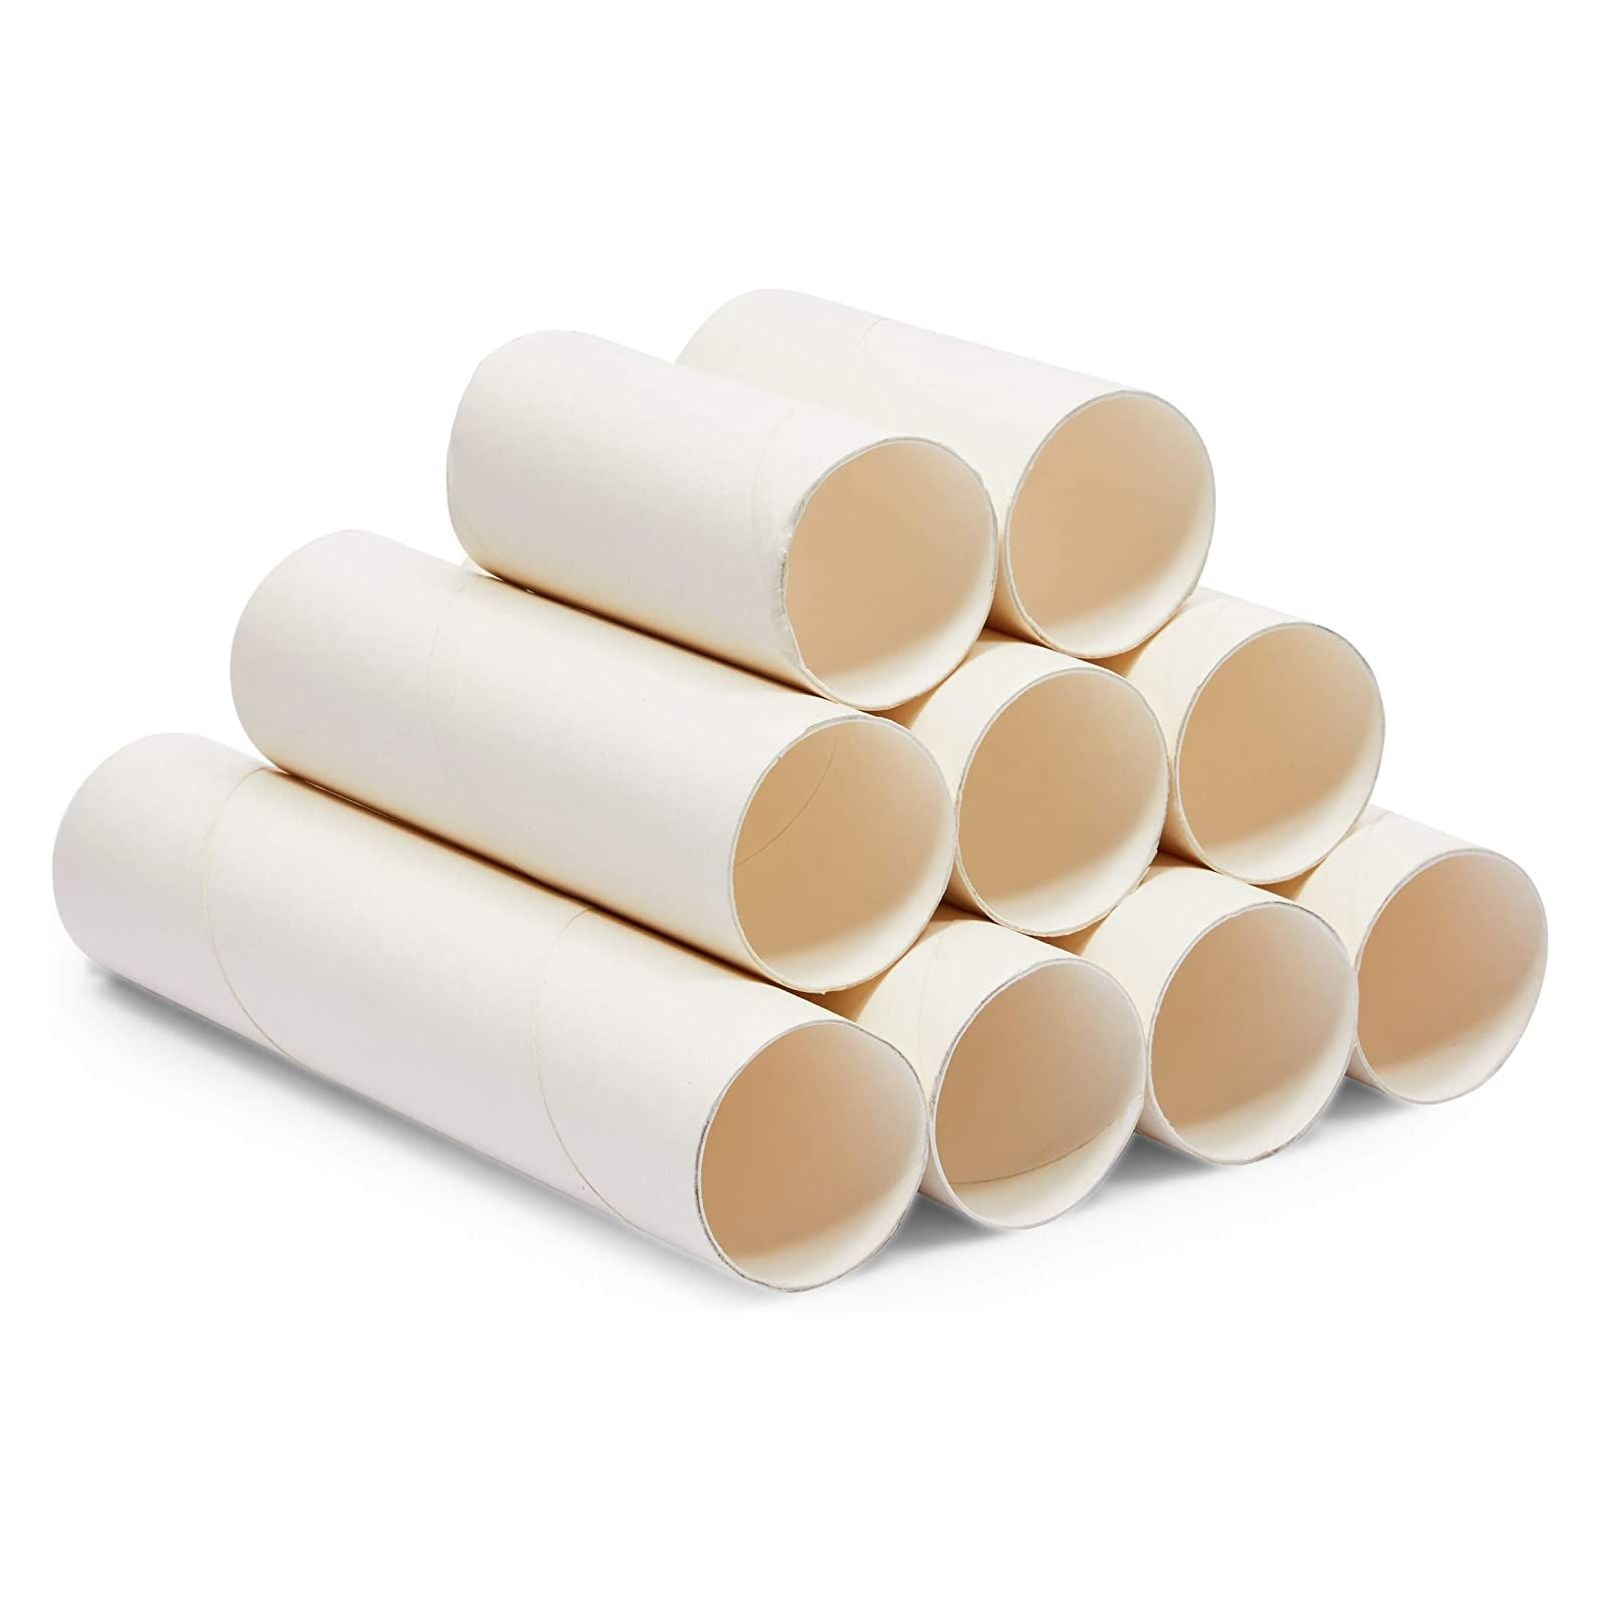 36 Pack Brown Cardboard Tubes for Crafts, DIY Craft Paper Roll for Diorama (1.6 x 4.7 in)